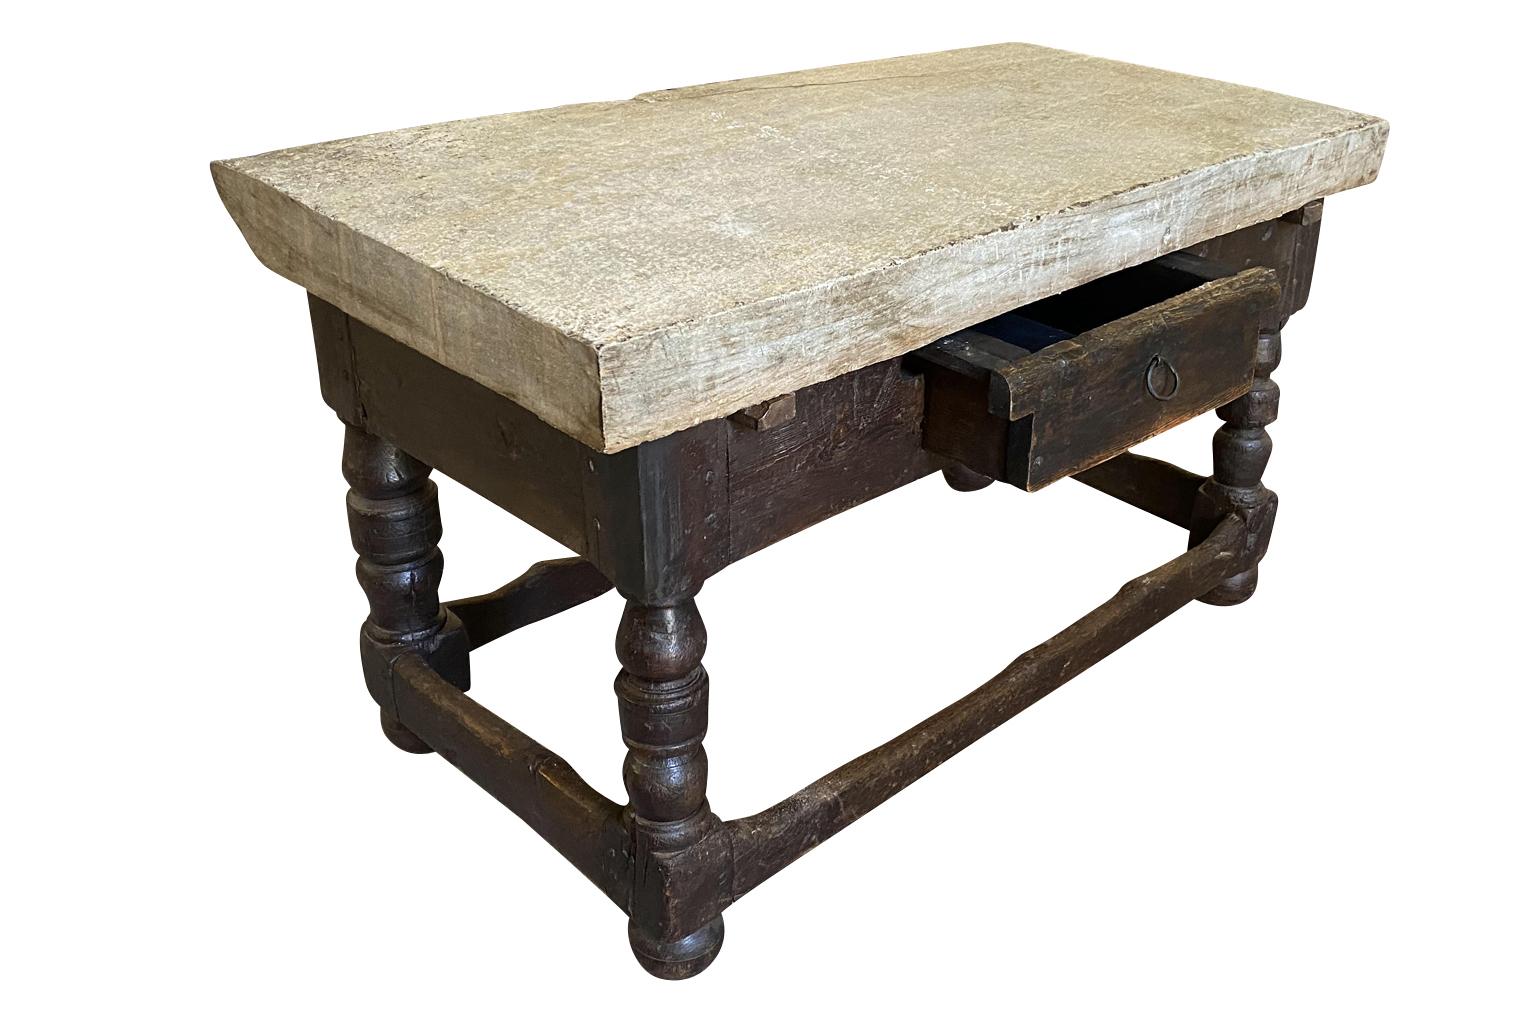 A very handsome 18th century French Butcher table. Beautifully constructed from richly stained oak with a single drawer and nicely turned legs topped with a very thick piece of stone. Wonderful as a kitchen island, work table in a potting shed or a